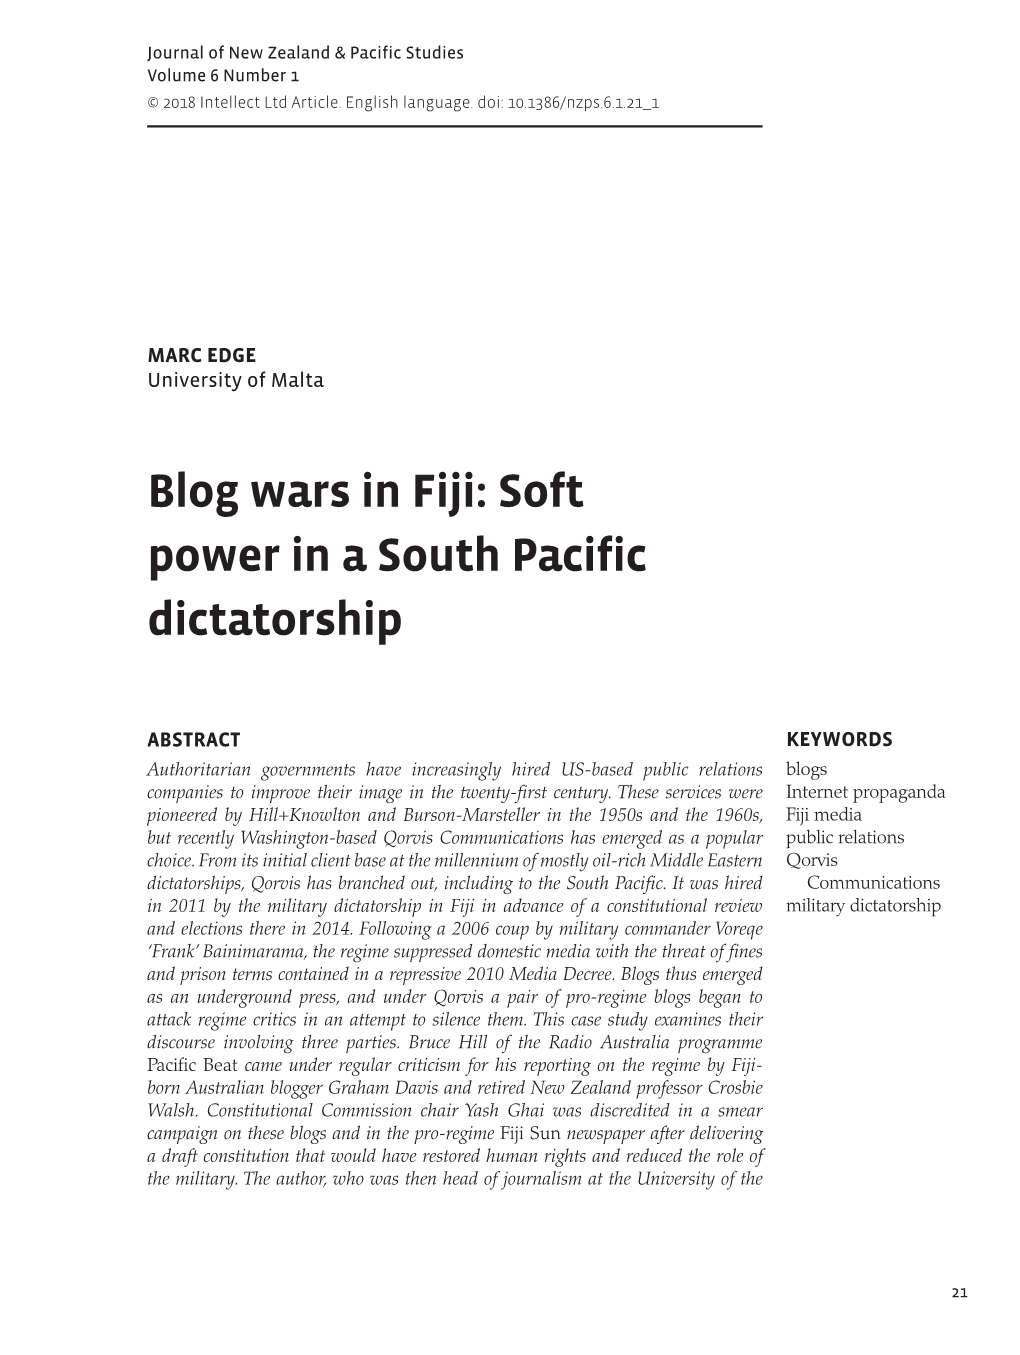 Blog Wars in Fiji: Soft Power in a South Pacific Dictatorship